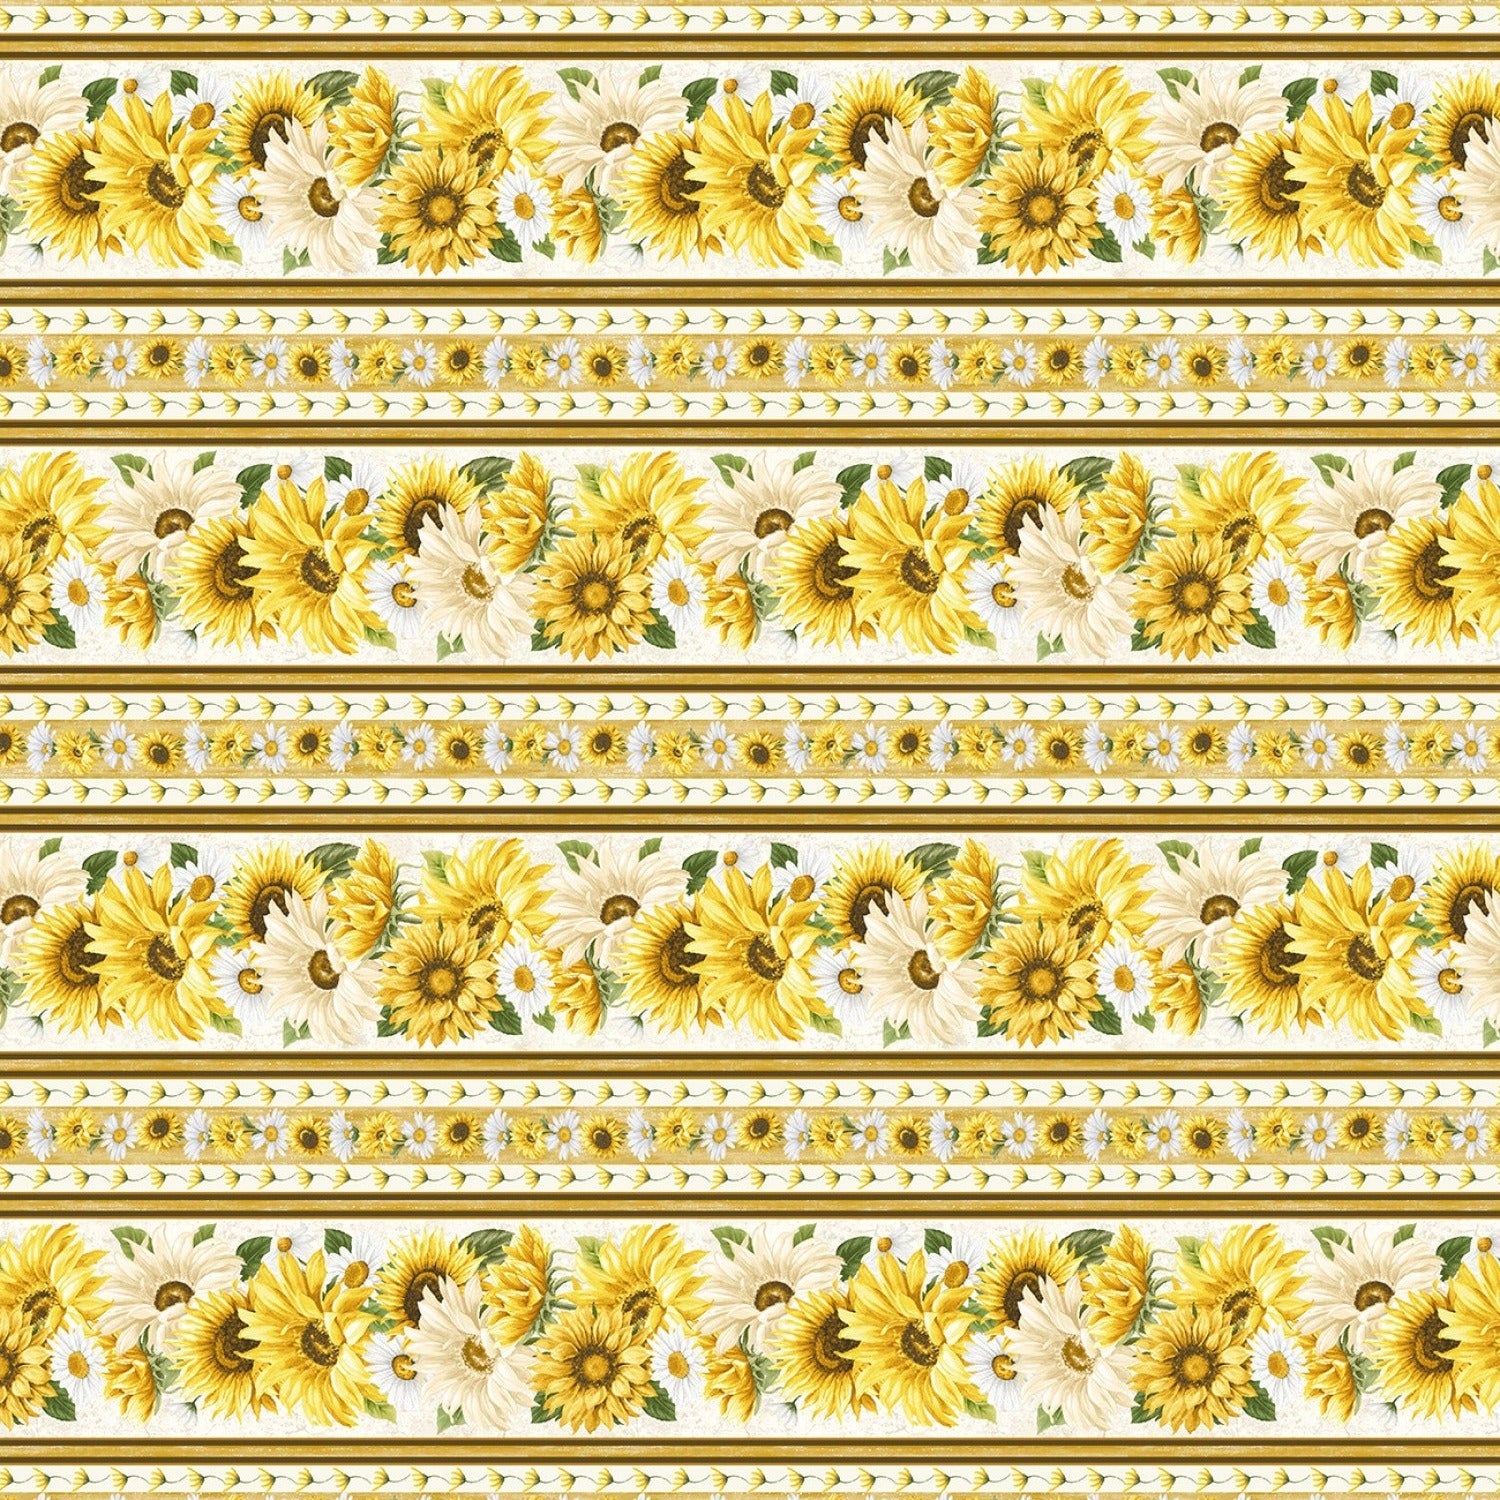 Timeless Treasures Fabric FQ (approximately 18" x 22") Bee Floral 11 Stripe 44" Cotton Quilting Fabric, Honey Bee Farm